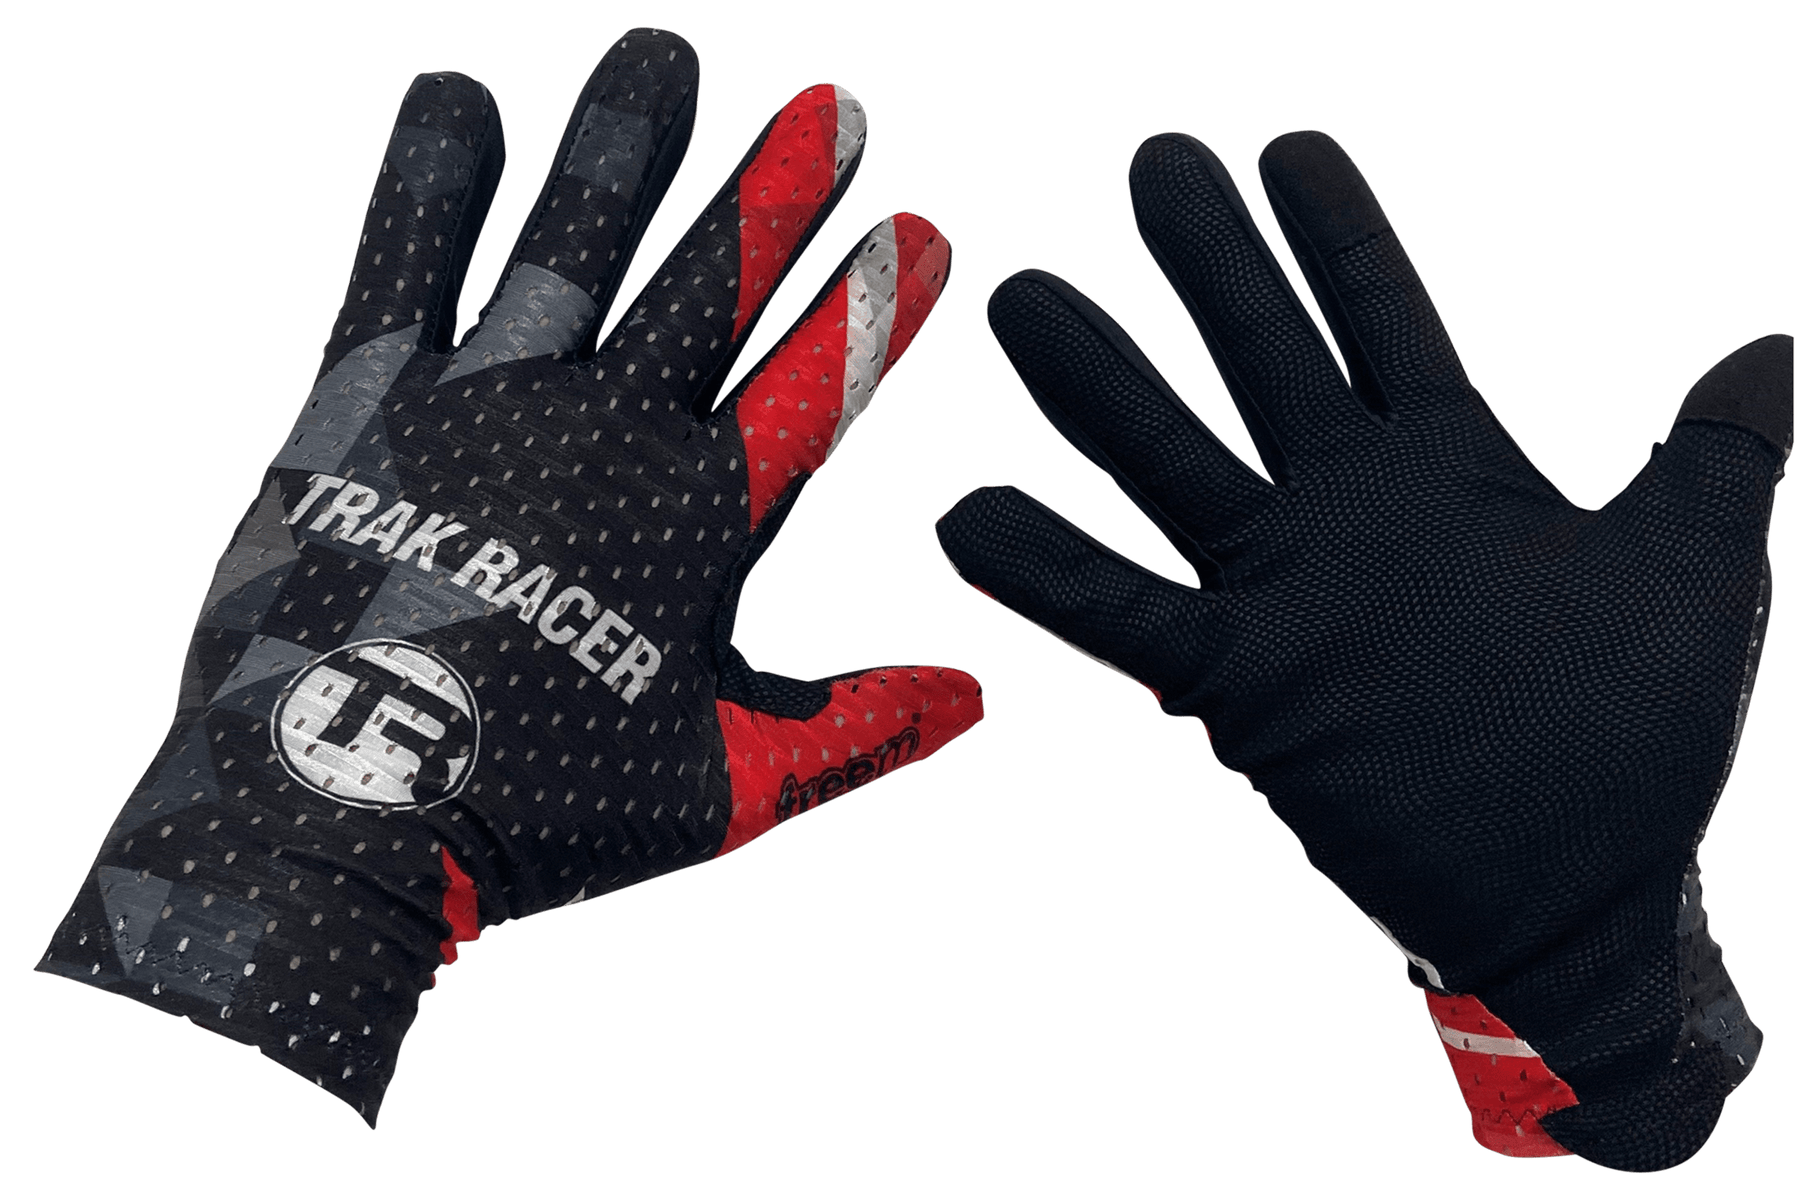 Buying Sim Racing Gloves? This Is Our Top 6!